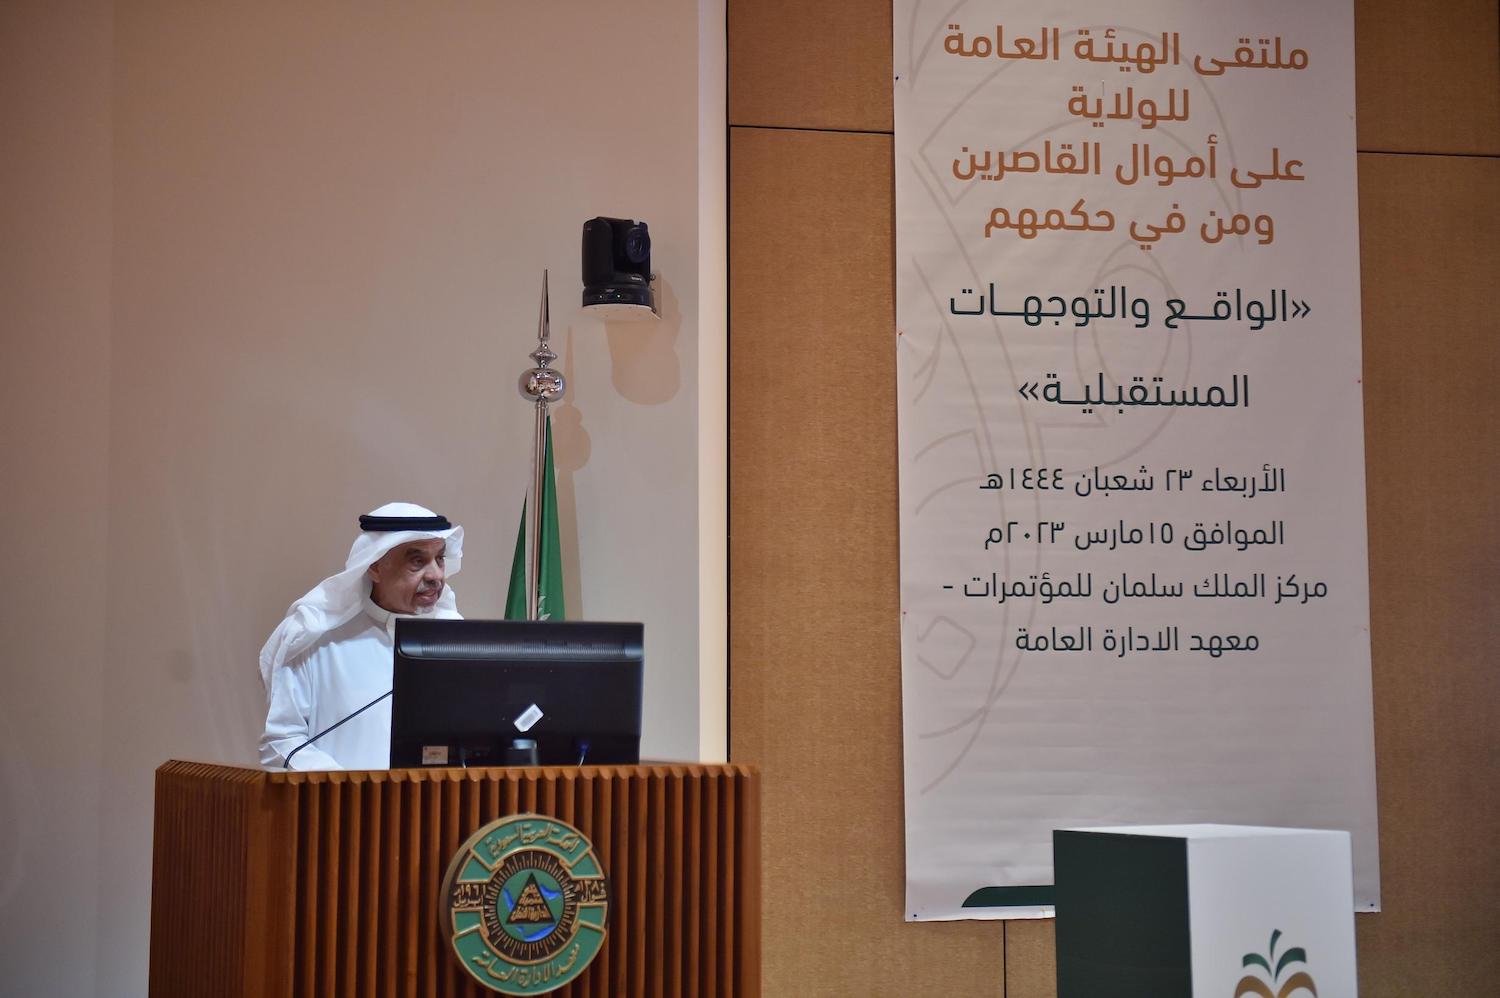 Mohammed Al-Alokla, chairman of the General Commission for the Guardianship of Trust Funds for Minors and their Counterparts, speaks at the forum in Riyadh. (Supplied)